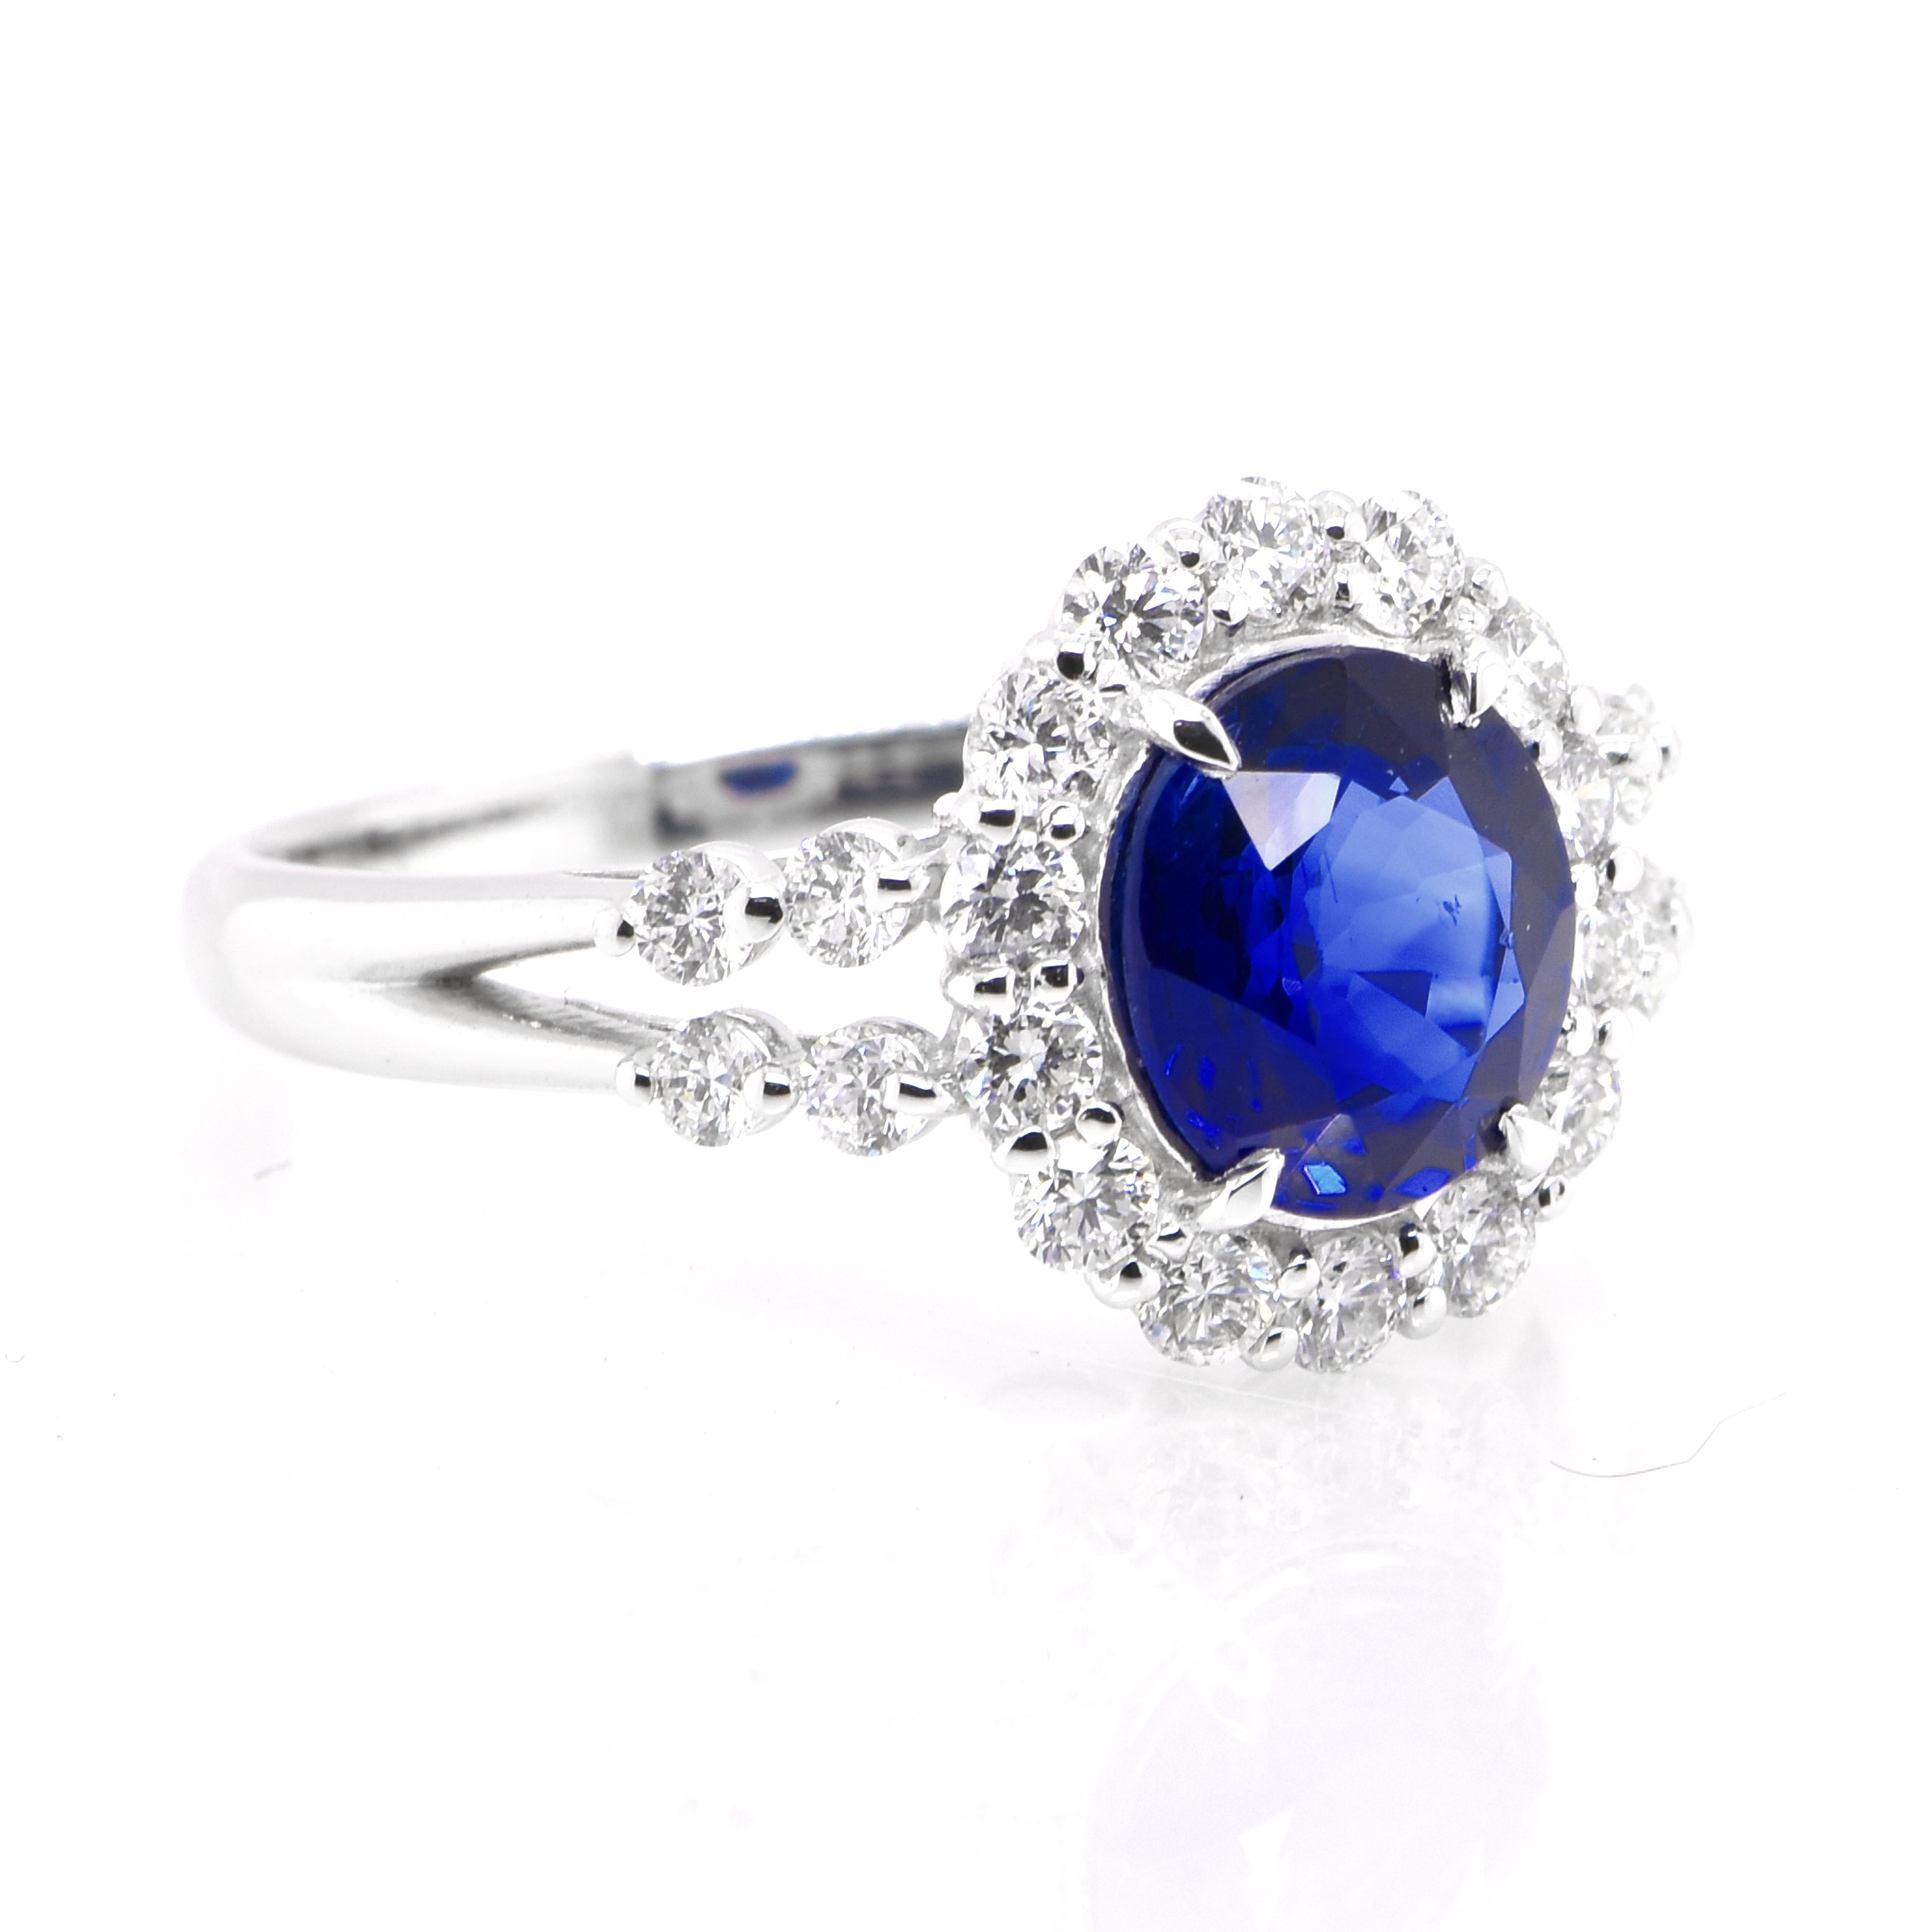 Modern 1.77 Carat Natural Madagascan Sapphire and Diamond Ring set in Platinum For Sale